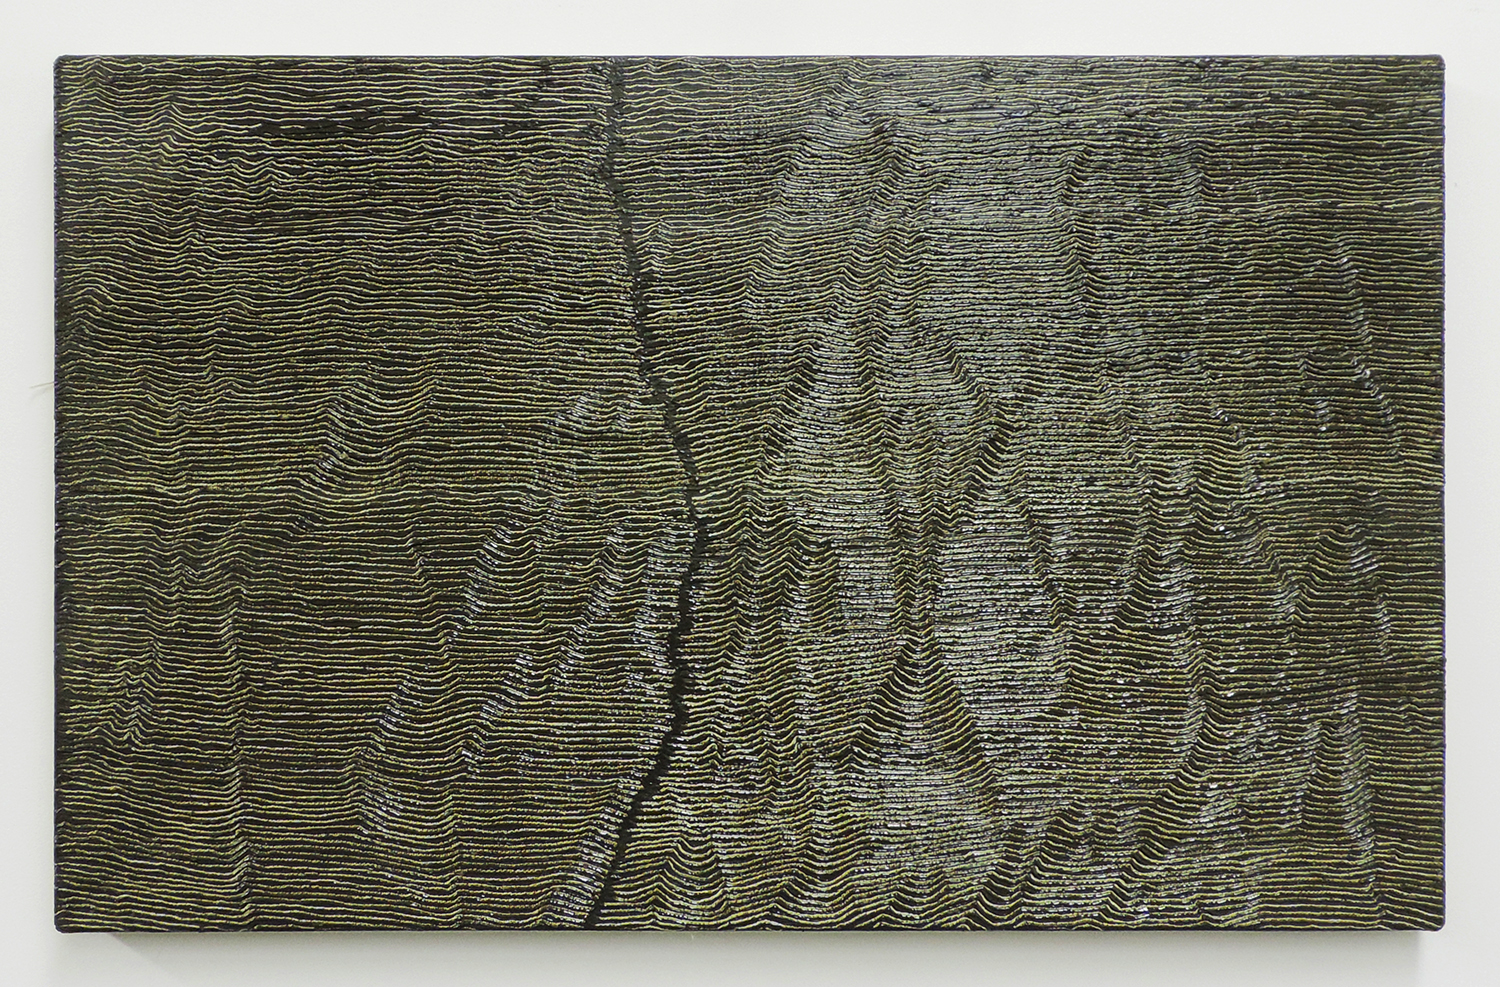 Fissure 12<br>Oil and Amber on canvas over panel｜33.7 x 53.4 cm, 2001